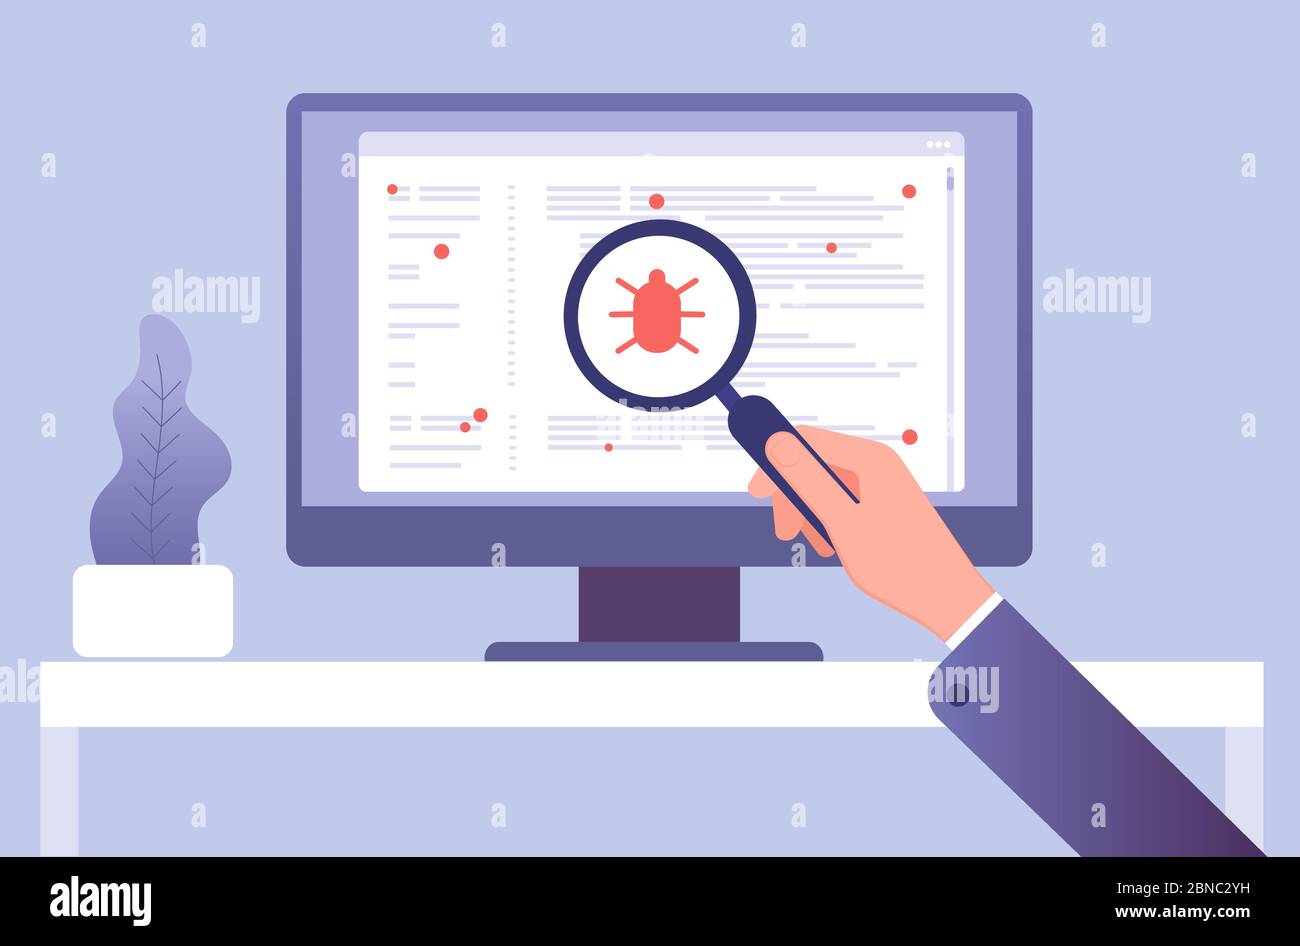 Computer virus concept. Hand with magnifying glass testing software. Bug virus icon on computer screen. Vector illustration. Search bug and virus, magnifier glass in hand Stock Vector